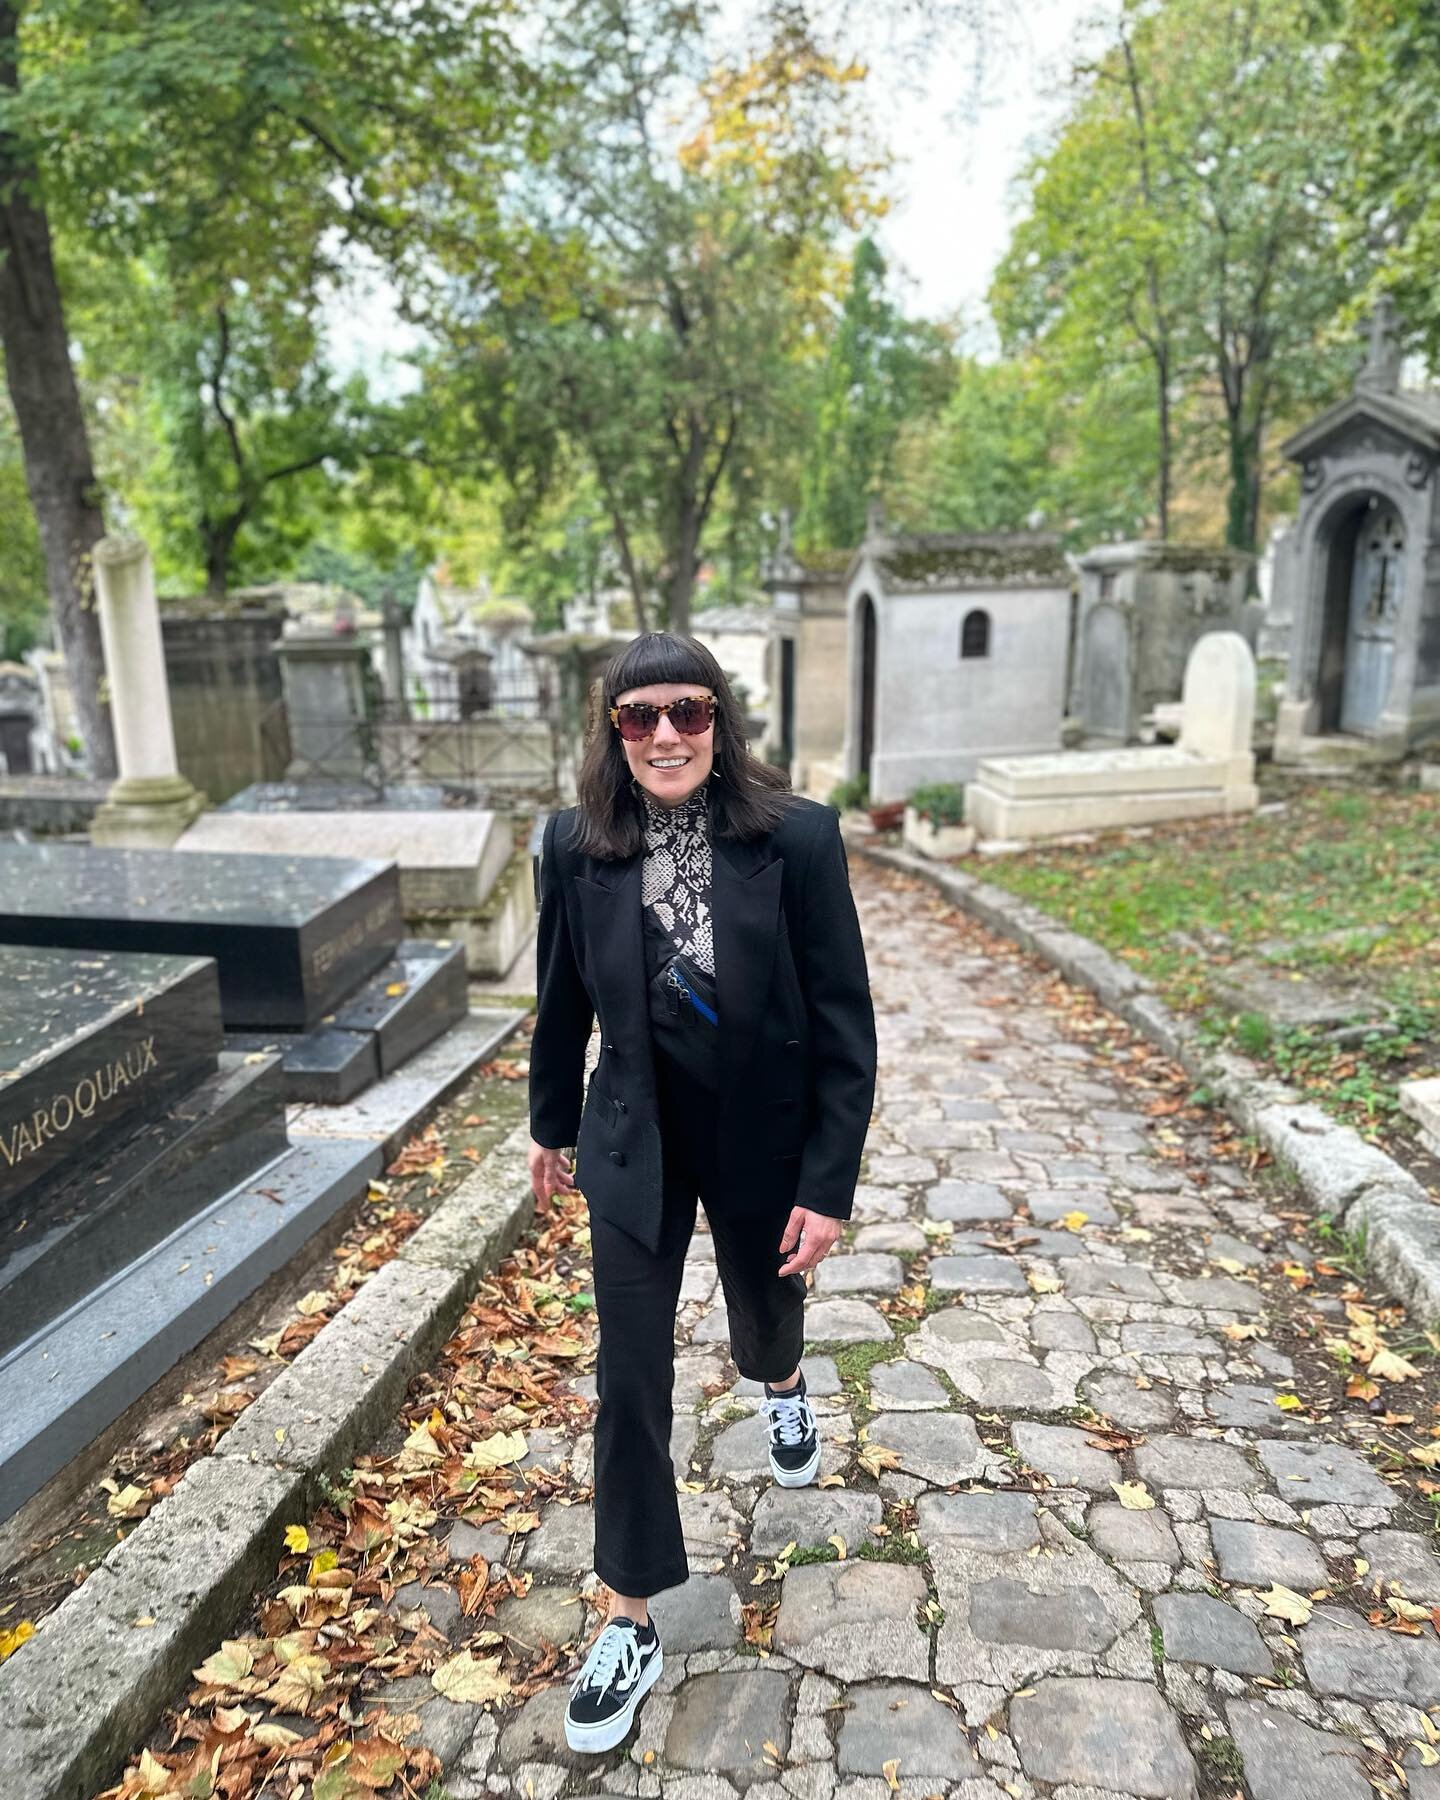 A perfect day in Paris: Strolling through P&egrave;re Lachaise Cemetery; seeing @invaderwashere art everywhere; lunch and the legendary cookies at @mokonutsbakery; visiting Degas&rsquo; ballerinas @museeorsay; eating foie gras and drinking Amer Picon